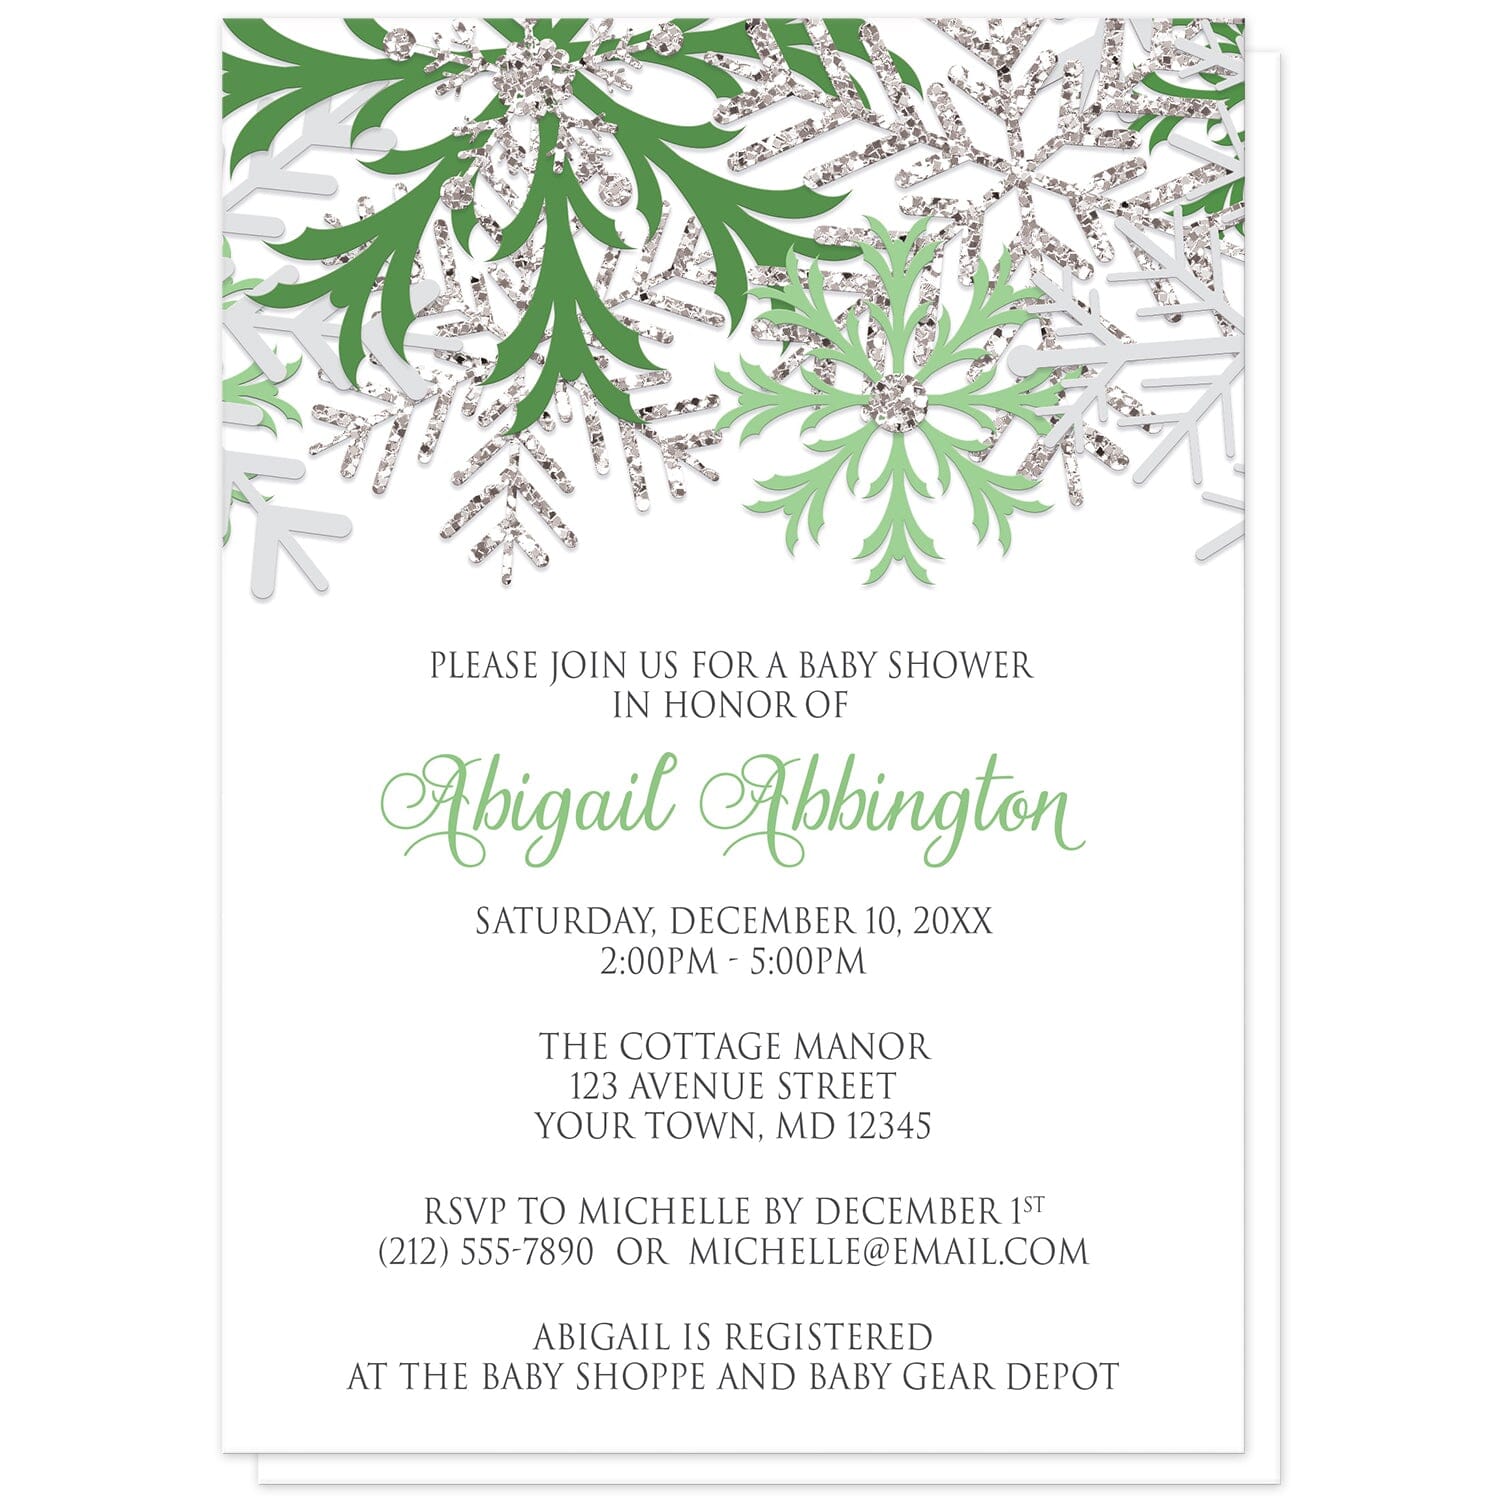 Winter Green Silver Snowflake Baby Shower Invitations at Artistically Invited. Beautiful winter green silver snowflake baby shower invitations designed with green, light green, silver-colored glitter-illustrated, and light gray snowflakes along the top over a white background. Your personalized baby shower celebration details are custom printed in green and gray below the pretty snowflakes.